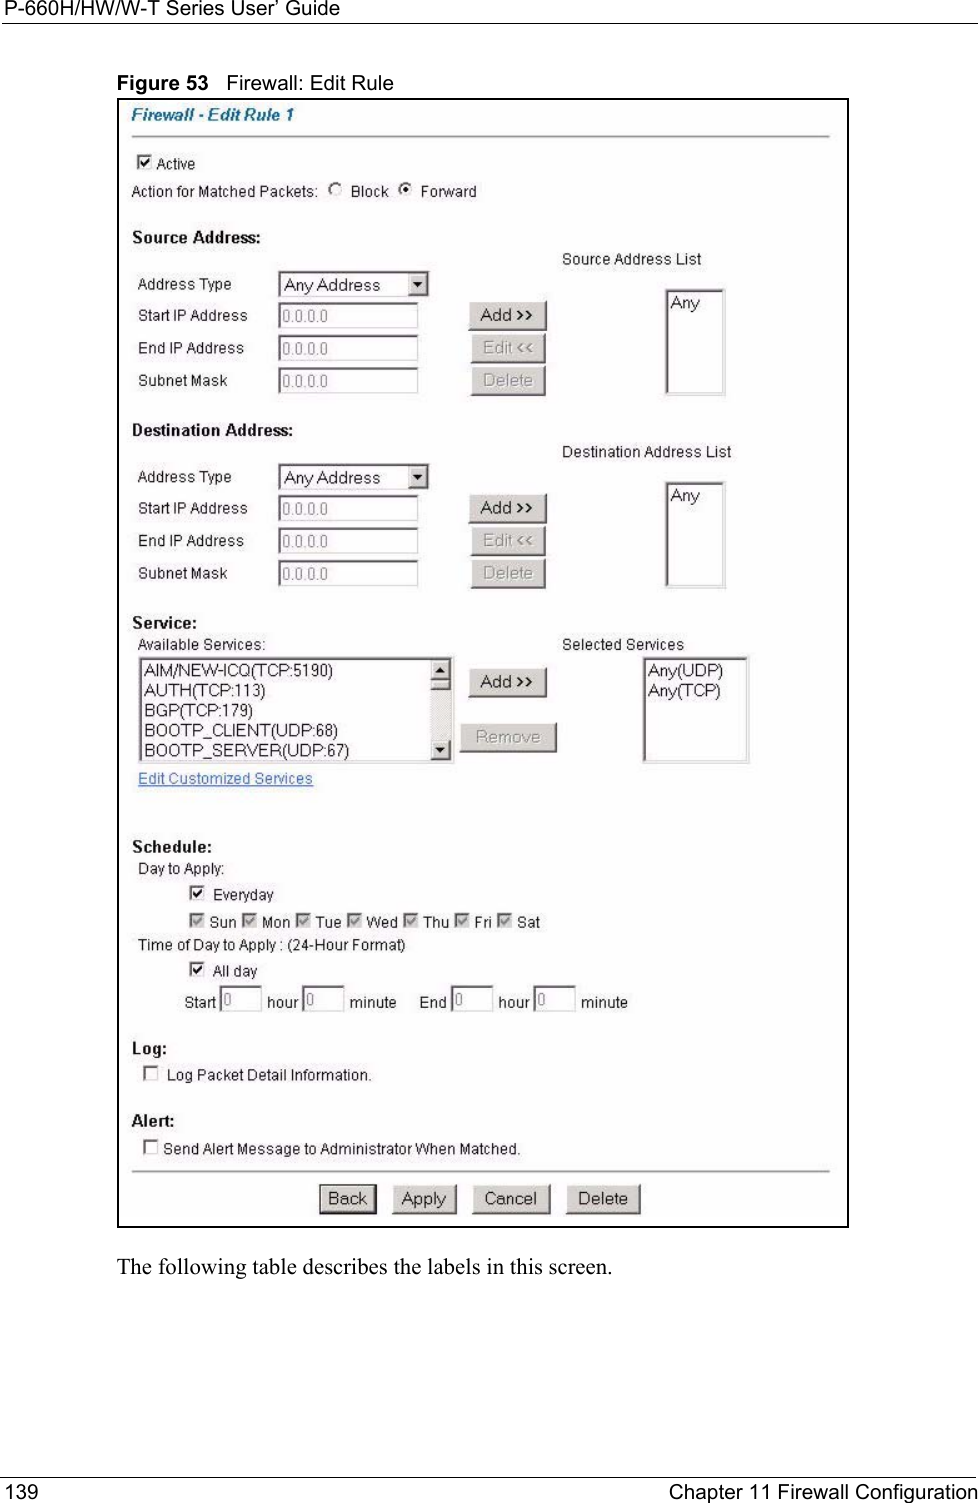 P-660H/HW/W-T Series User’ Guide139 Chapter 11 Firewall ConfigurationFigure 53   Firewall: Edit RuleThe following table describes the labels in this screen.